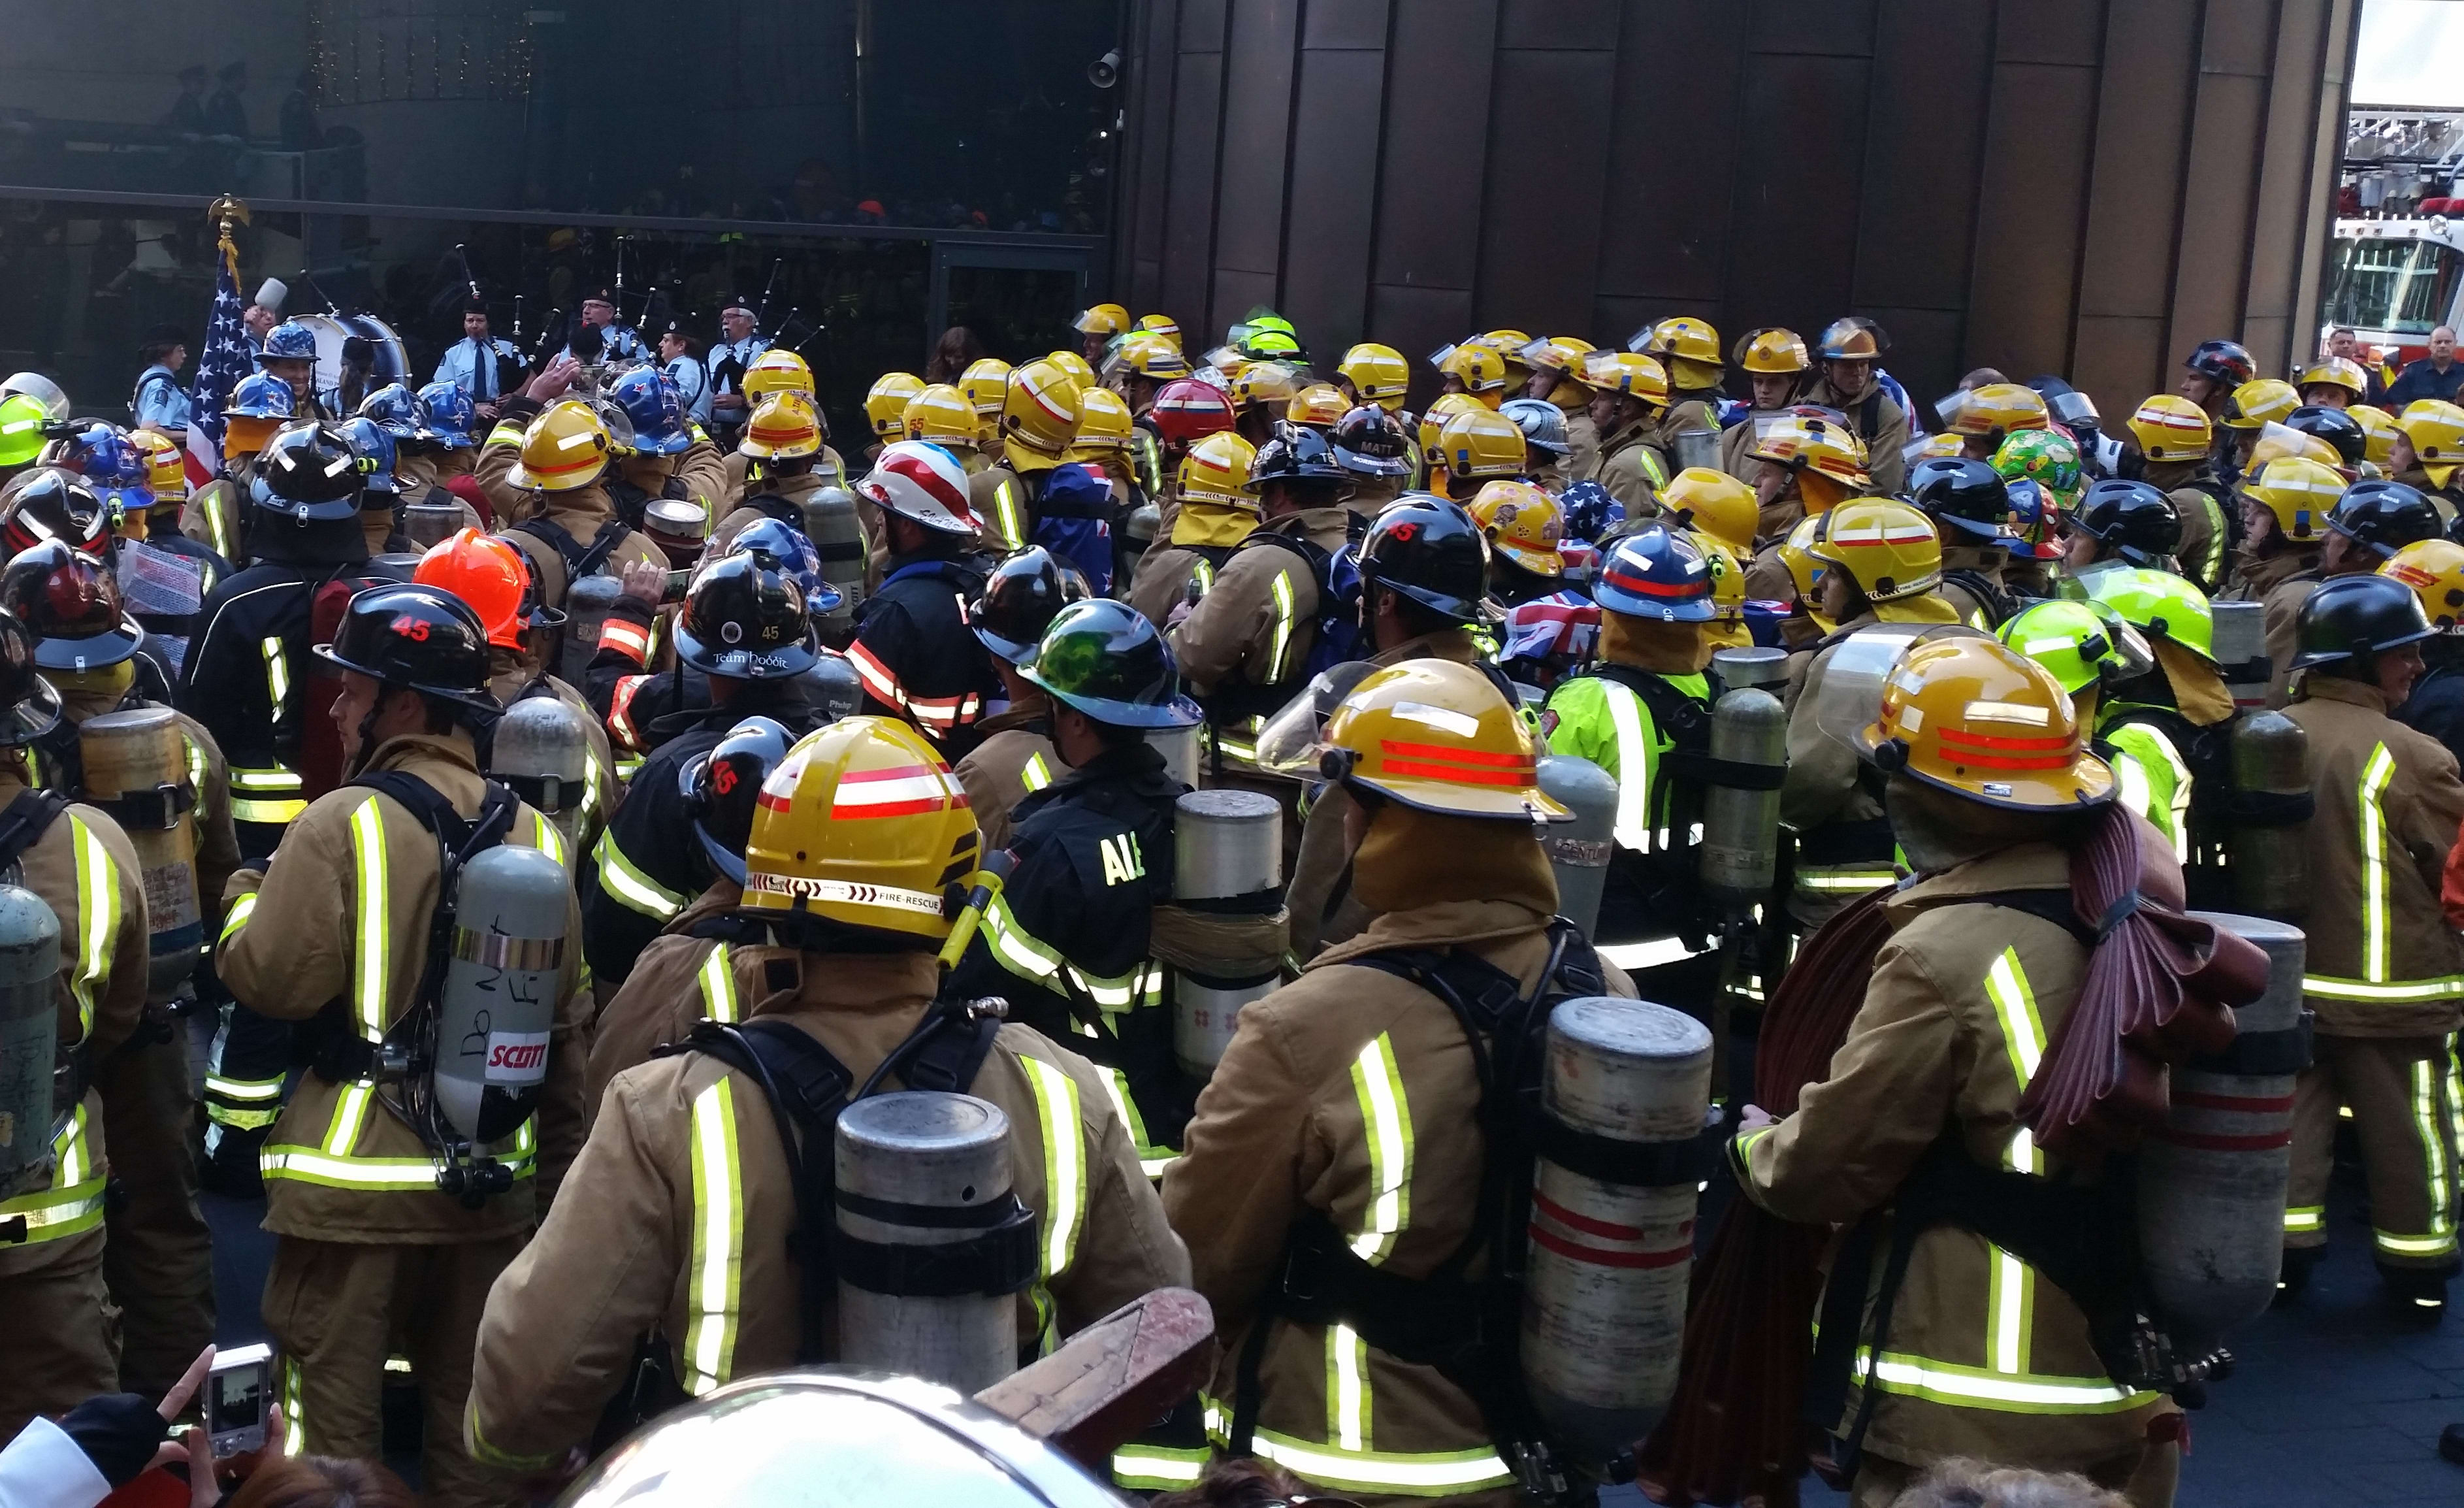 About 160 firefighters gathered to climb Auckland's Sky Tower in commemoration of the firefighters who died during 9/11.